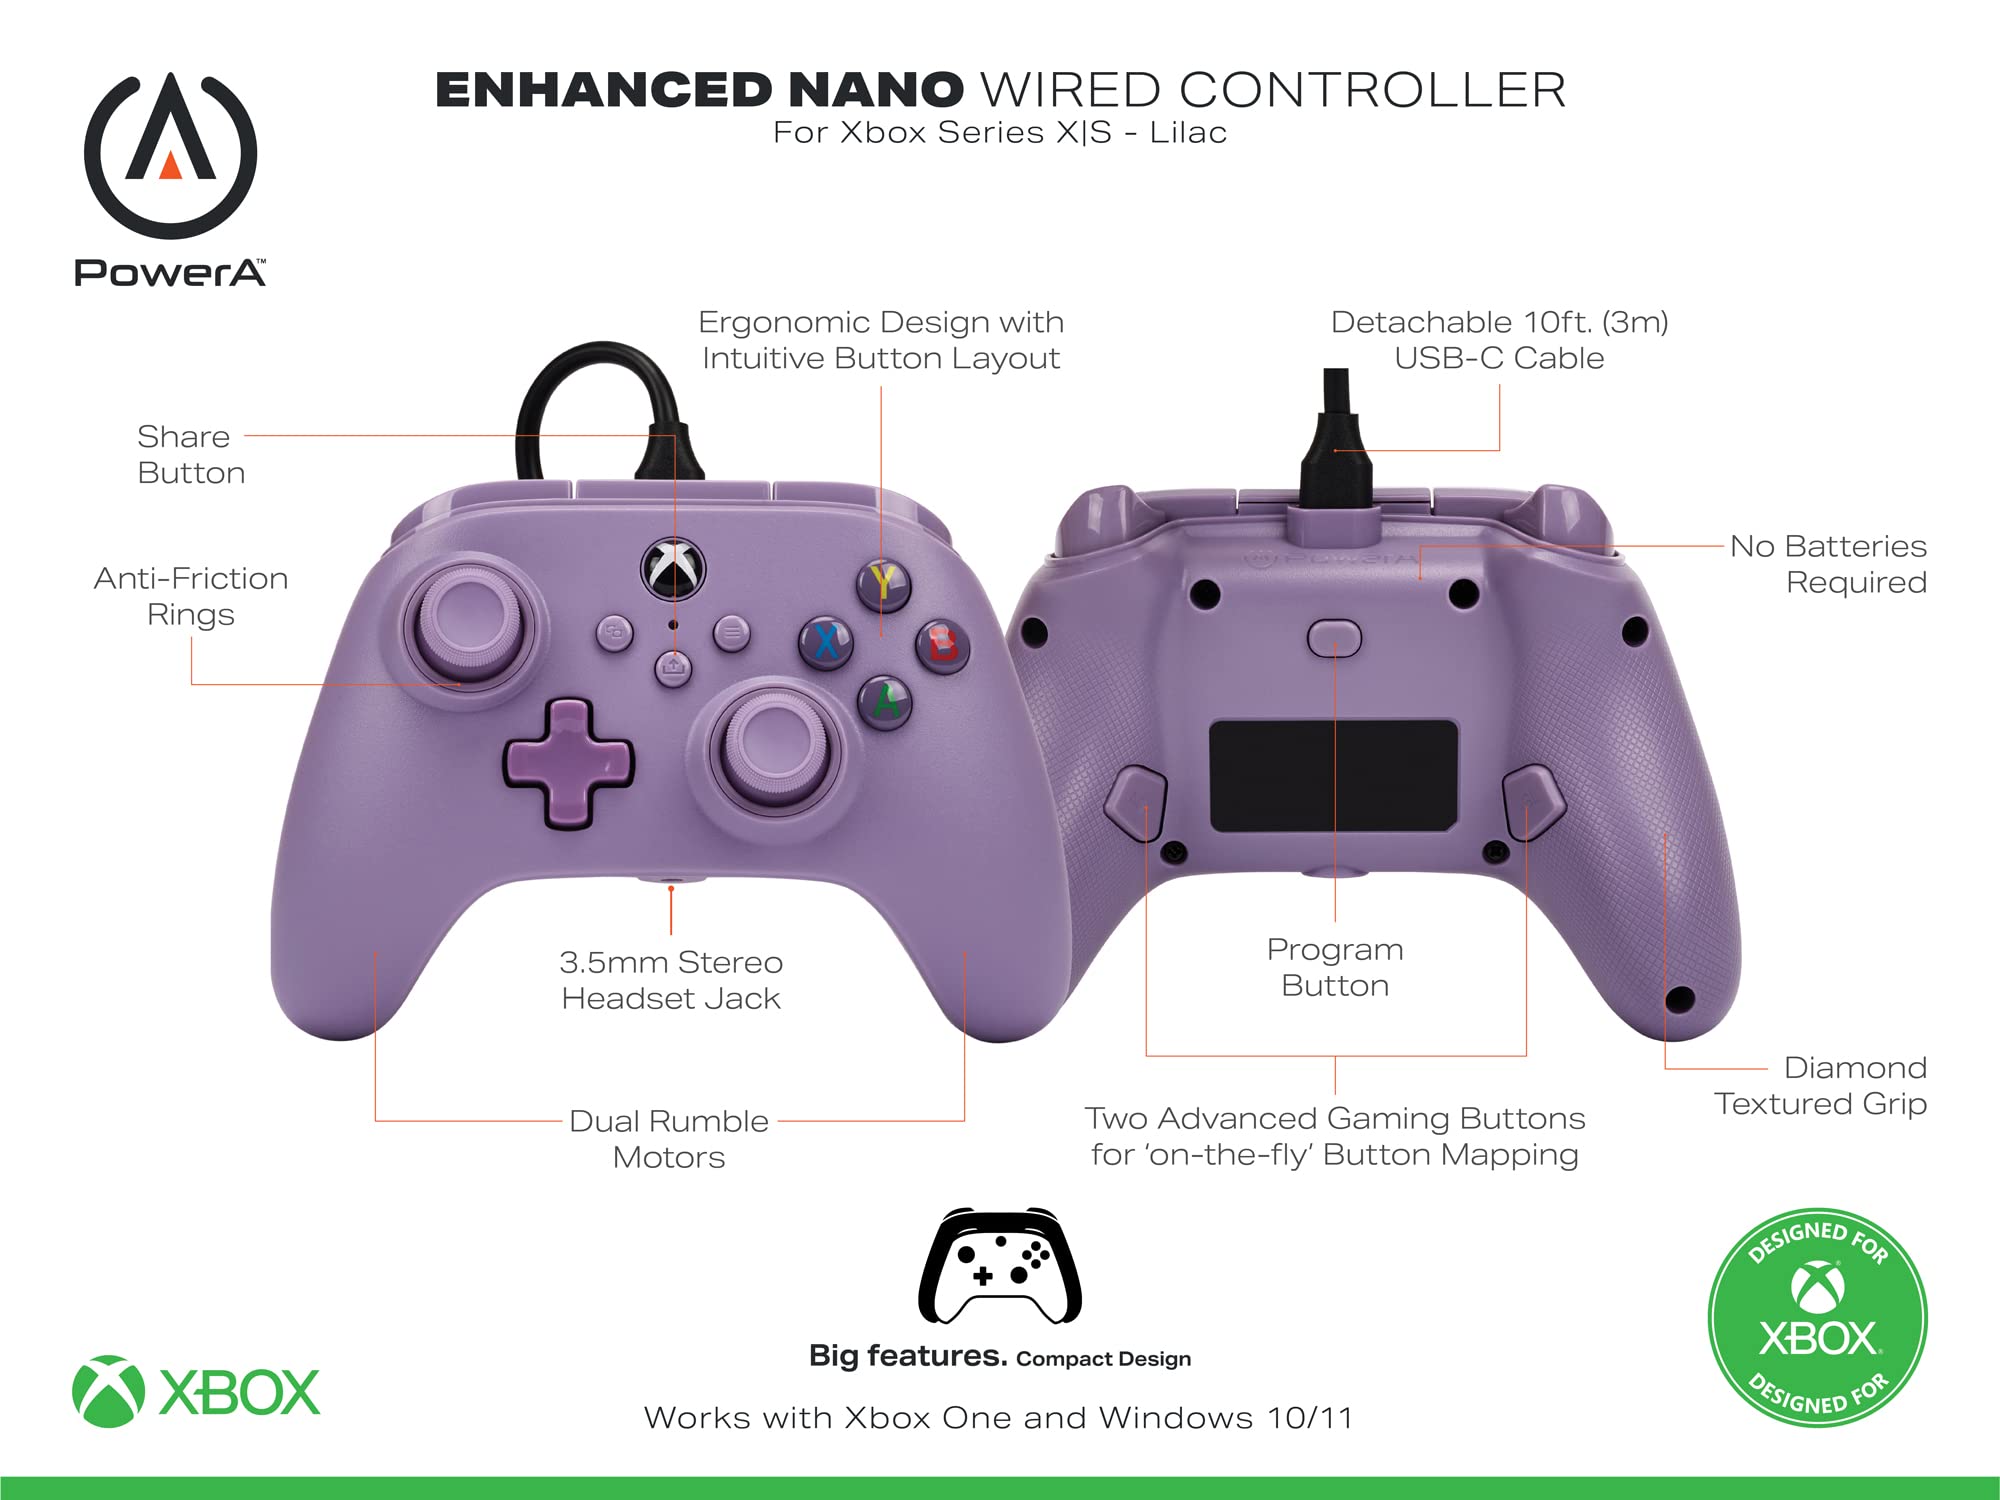 PowerA Nano Enhanced Wired Controller for Xbox Series X|S - Lilac, portable, compact, gamepad, video game, gaming controller, works with Xbox One and Windows 10/11